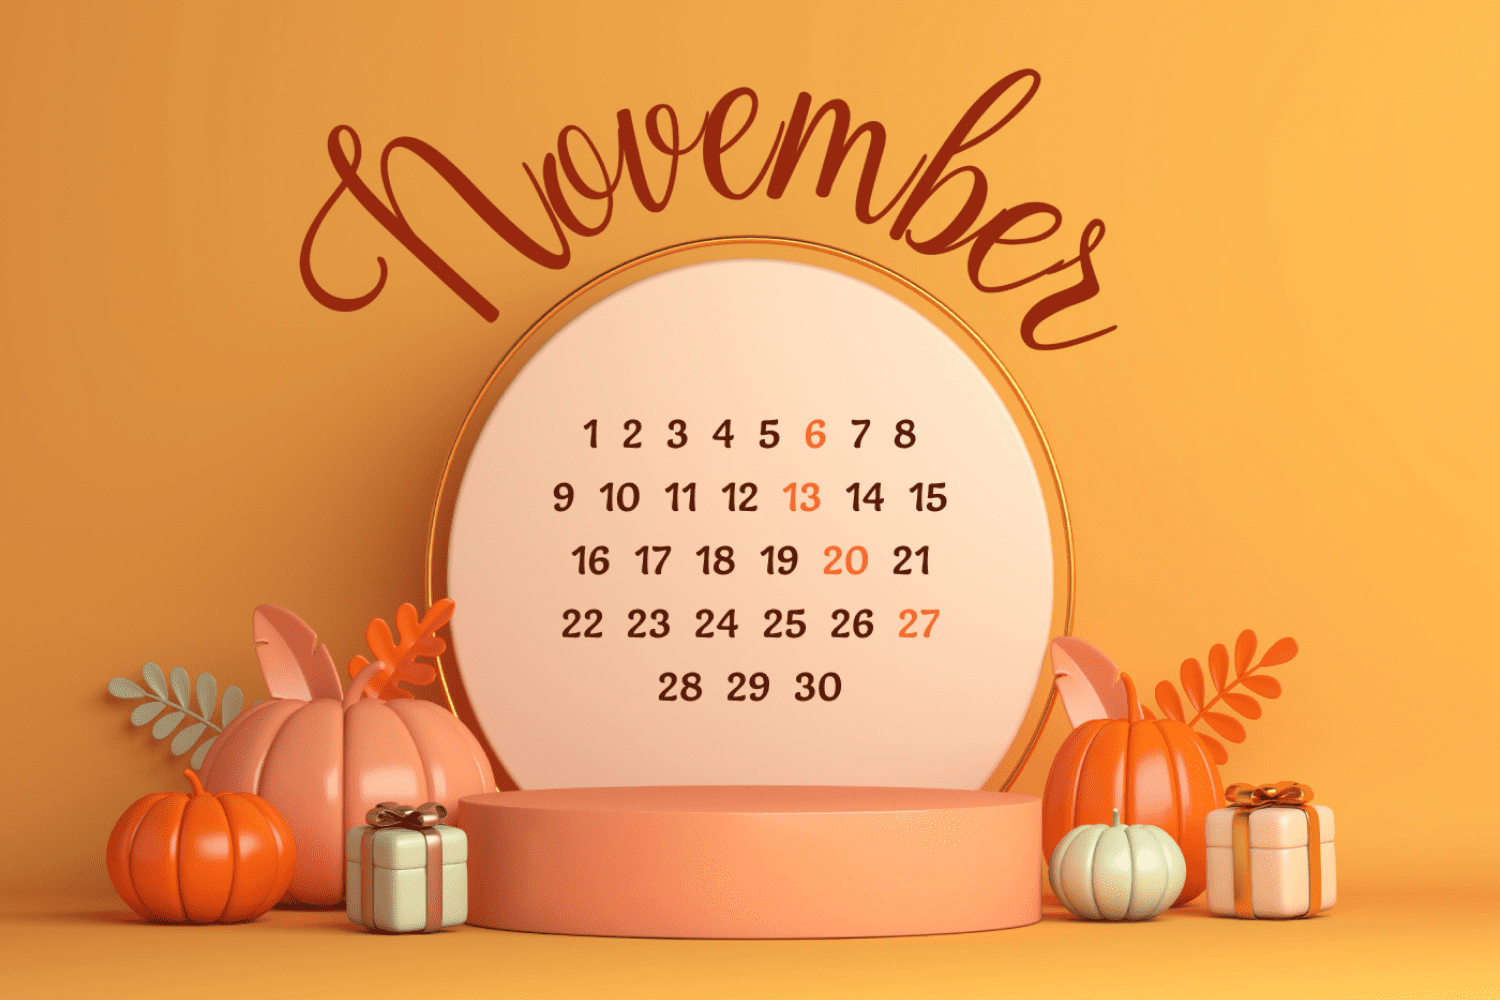 Calendar for November in a circle next to which there are toy pumpkins and gifts.